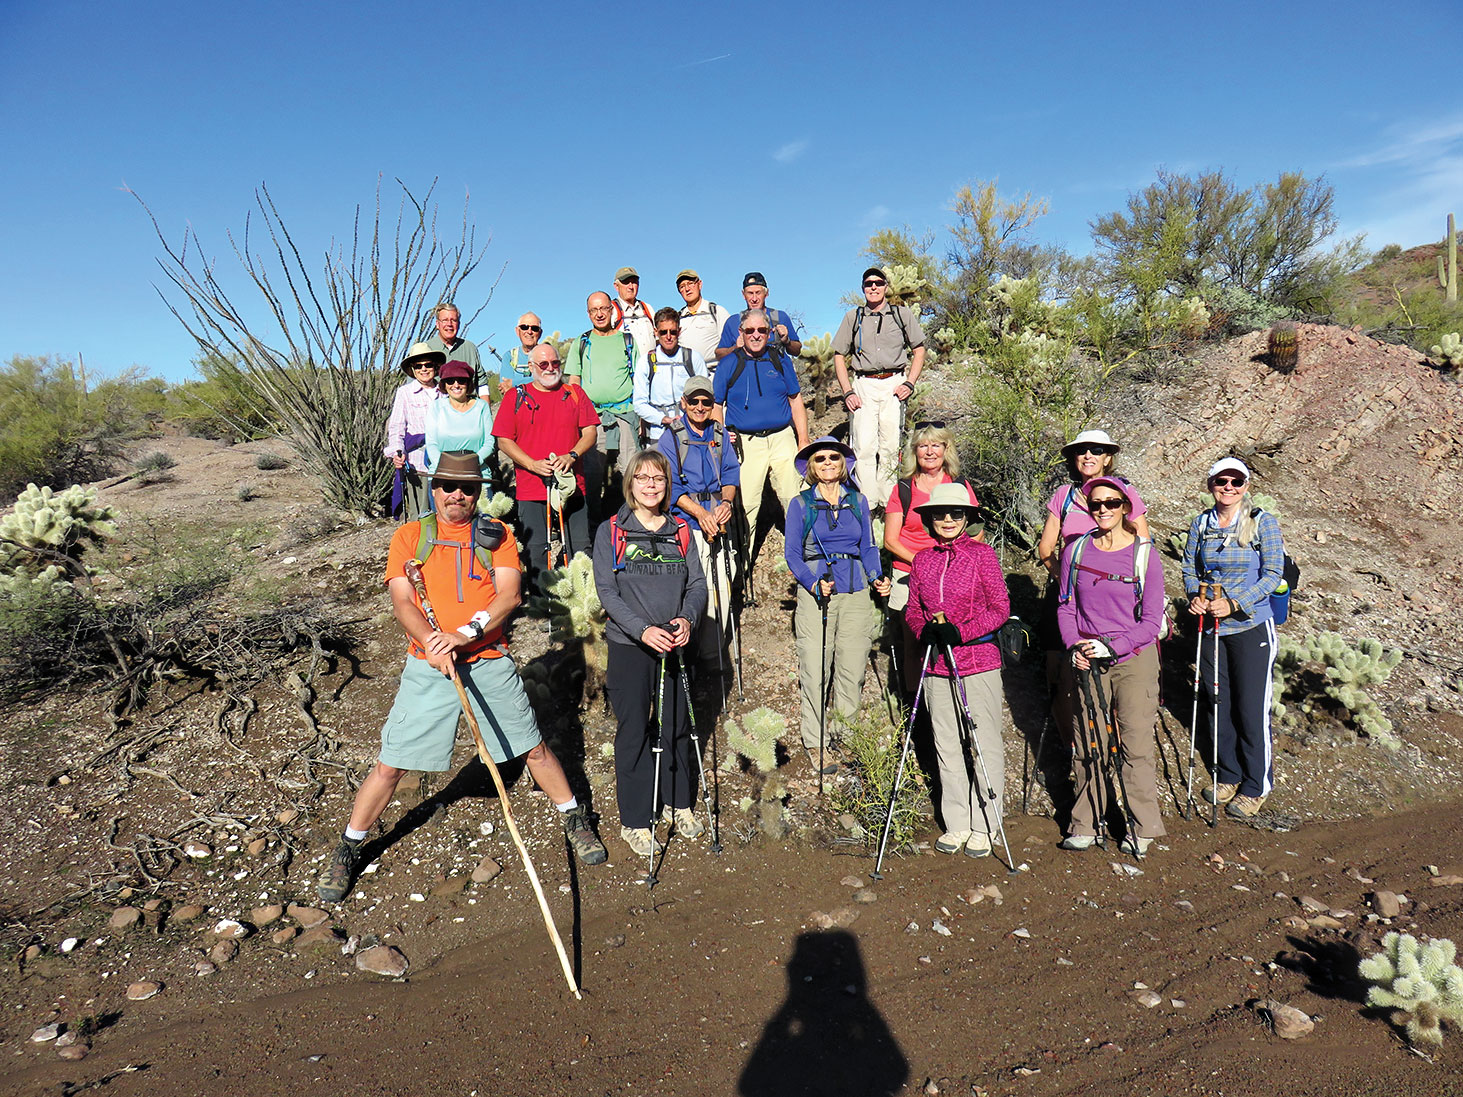 Front, left to right: Nancy Love (hike leader), Jeanette Wellman, Hal King, Sandy Mednick, Debbie Barbe, Linda Vaughn, Kristine Hanlon, Cathy Wills, Art Solorio, Tom Lenertz (guest); back: Lynn Warren, Bob Lenertz, Marty Gilligan (guest), Tom Wellman, Wayne McKinney, Kay Thomas and Mike McEvilly enjoying the morning sun in front of the Stone Throne; photo by Doug Jamiolkowski.